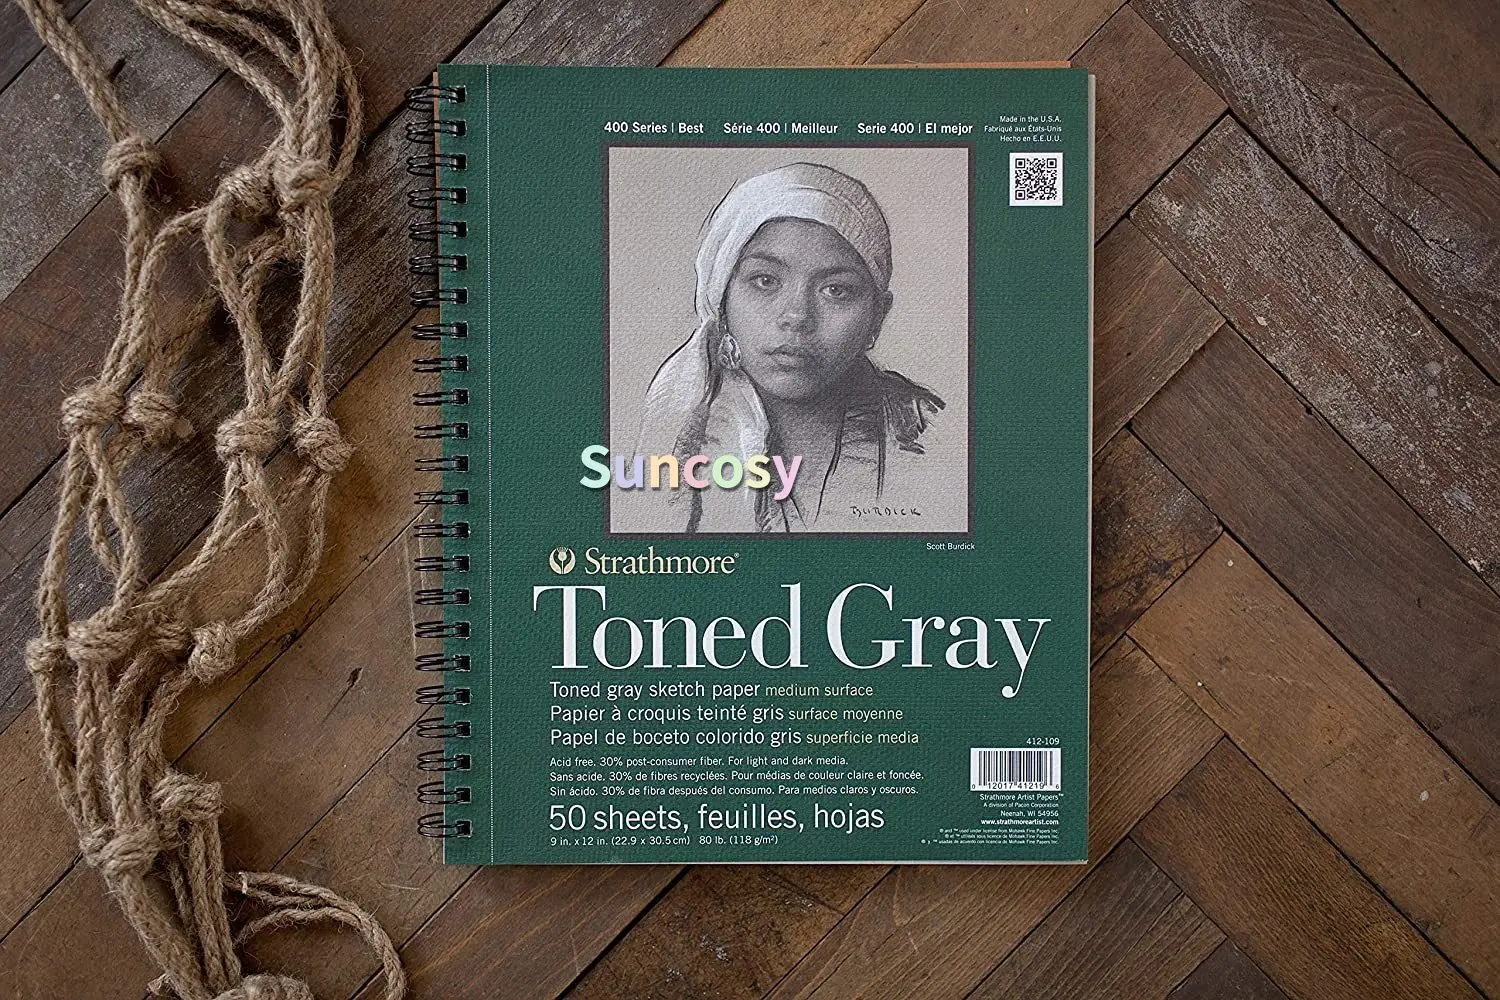 Gray 9 X 12 in 50 Sheets 80 lb Post Consumer Fiber Wire Binding Recycled Toned Sketch Pad 